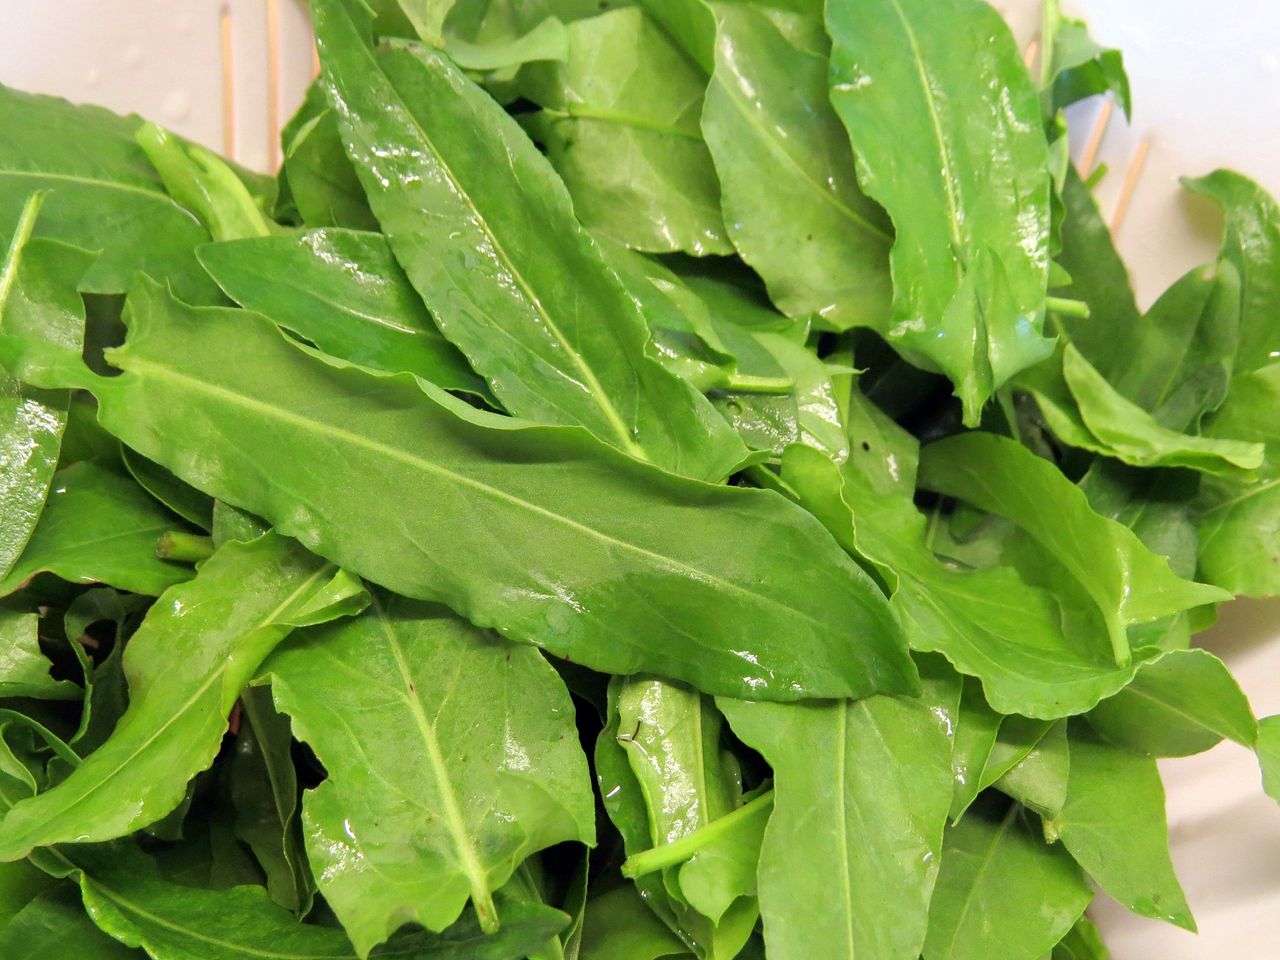 Rediscovering sorrel, an ancient remedy in our modern kitchen